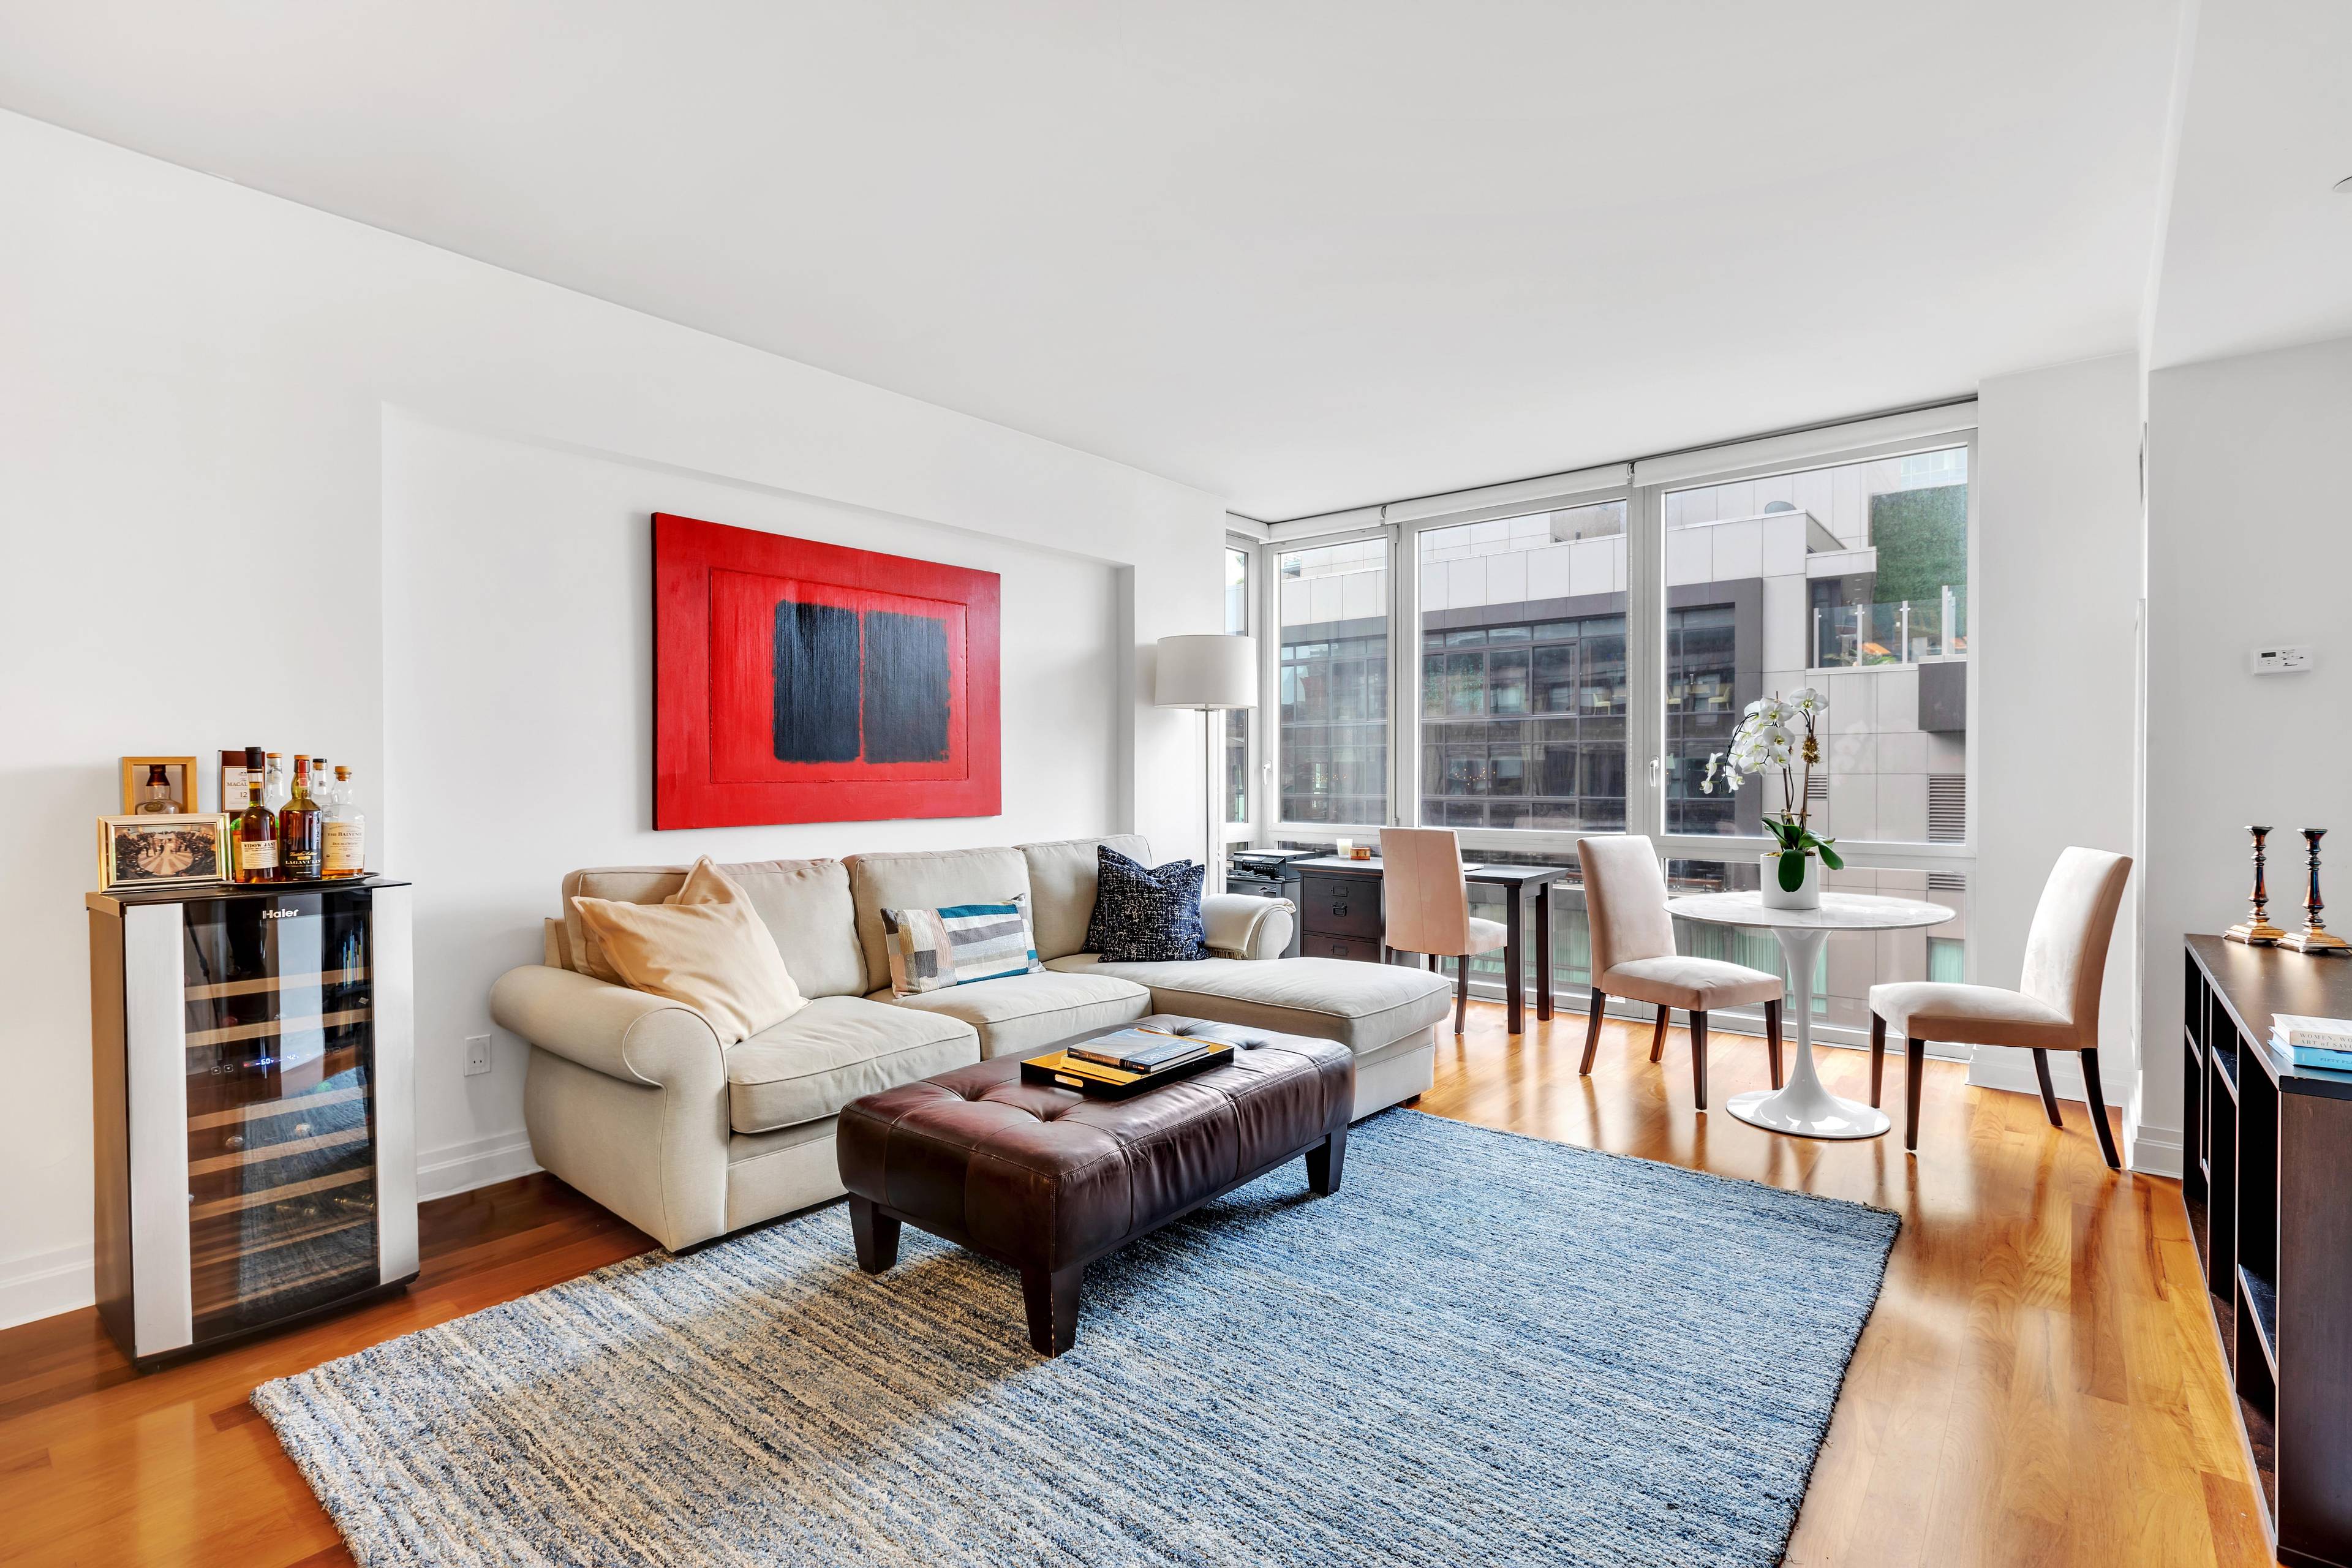 Apartment 20C at 39 East 29th Street is a dramatic space with high ceilings, imported teak hardwood floors, and floor to ceiling windows that create an ambiance of opulence and ...